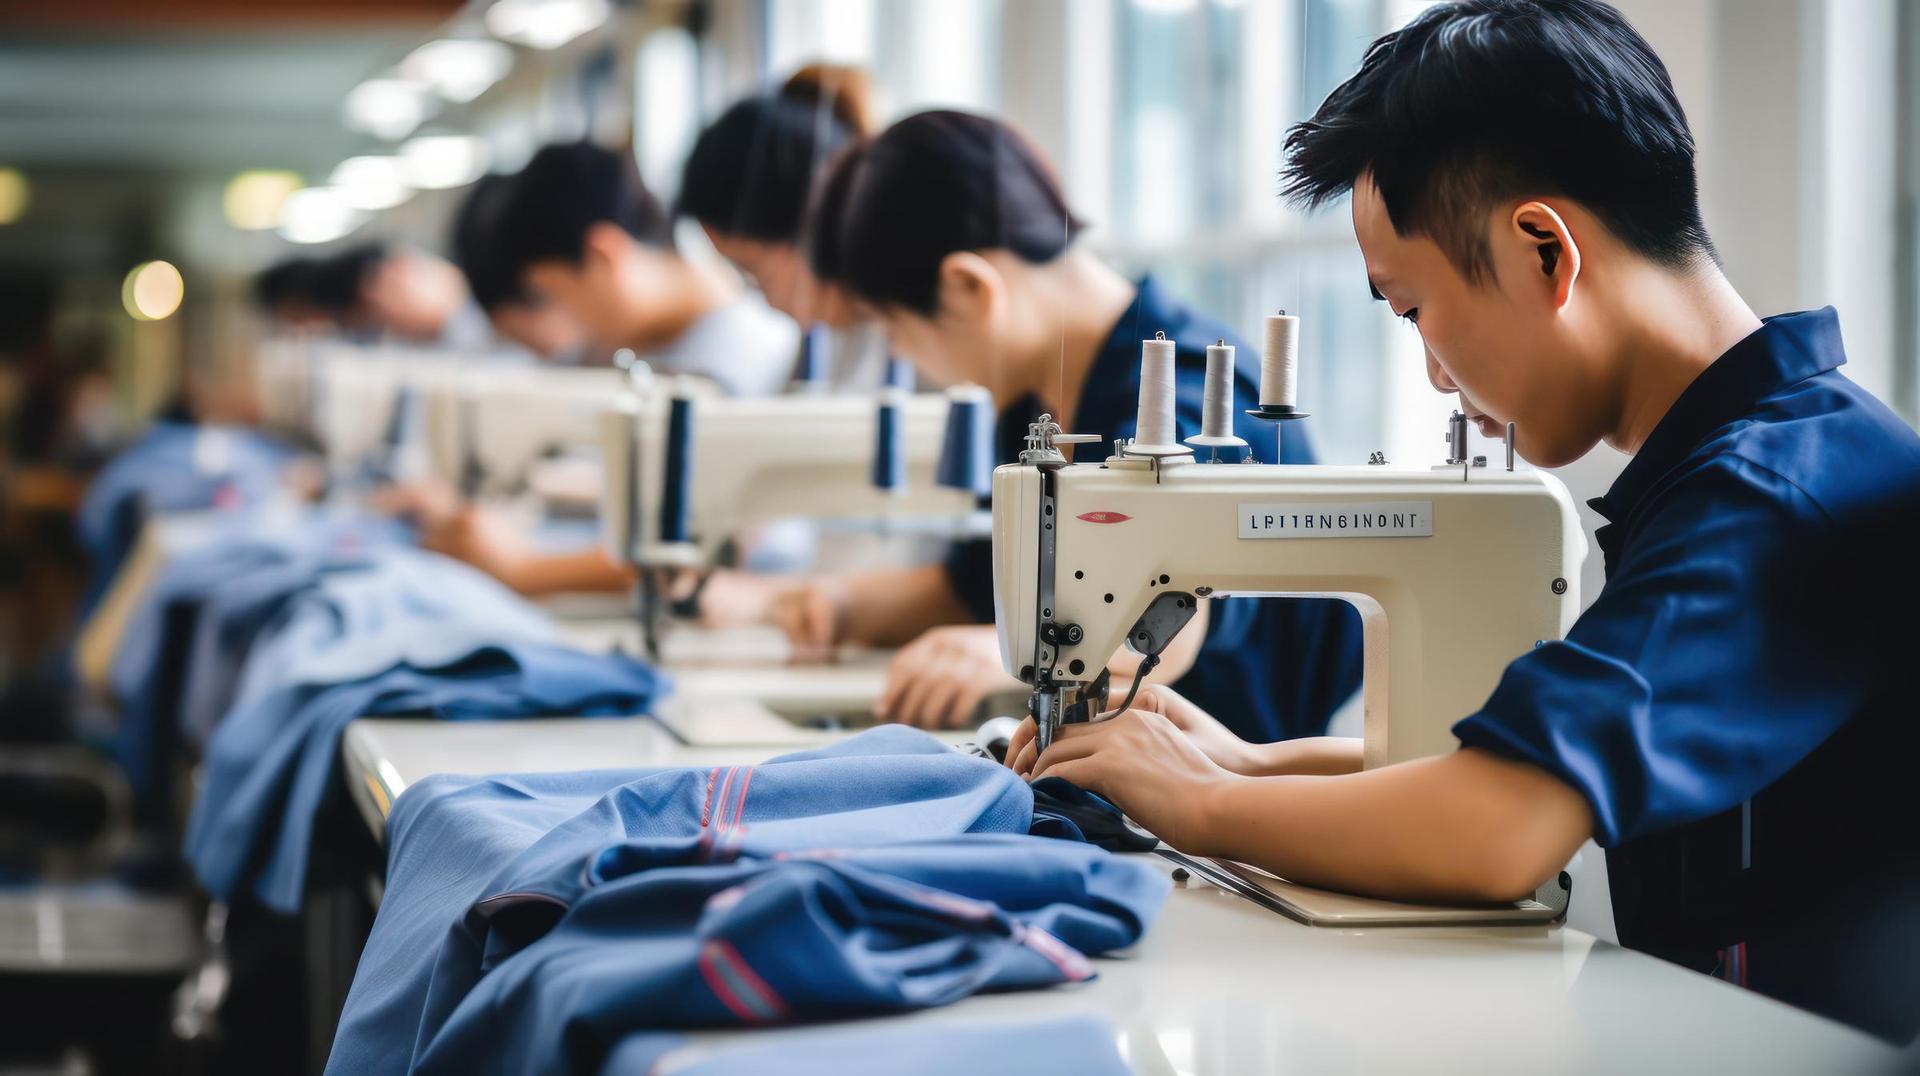 Workers sewing apparel garments in factory